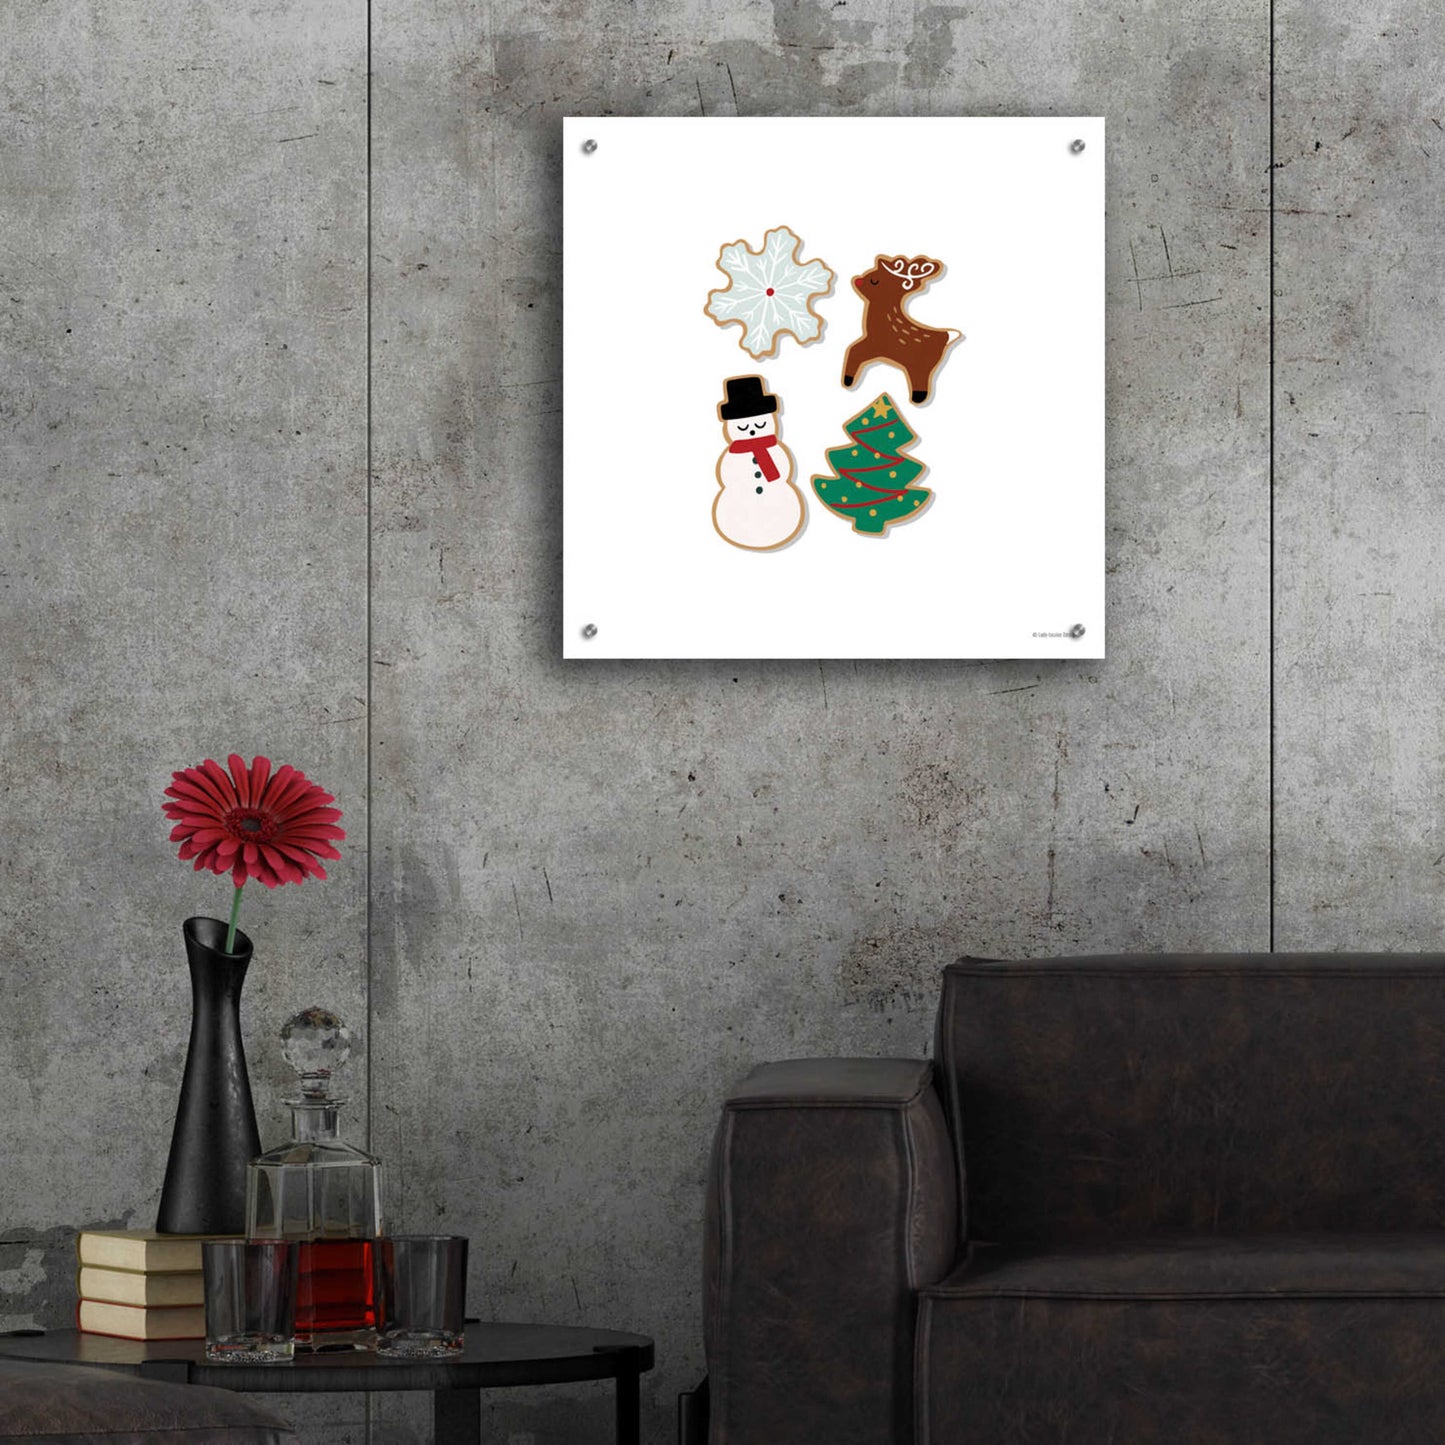 Epic Art 'Christmas Cookies' by Lady Louise Designs, Acrylic Glass Wall Art,24x24